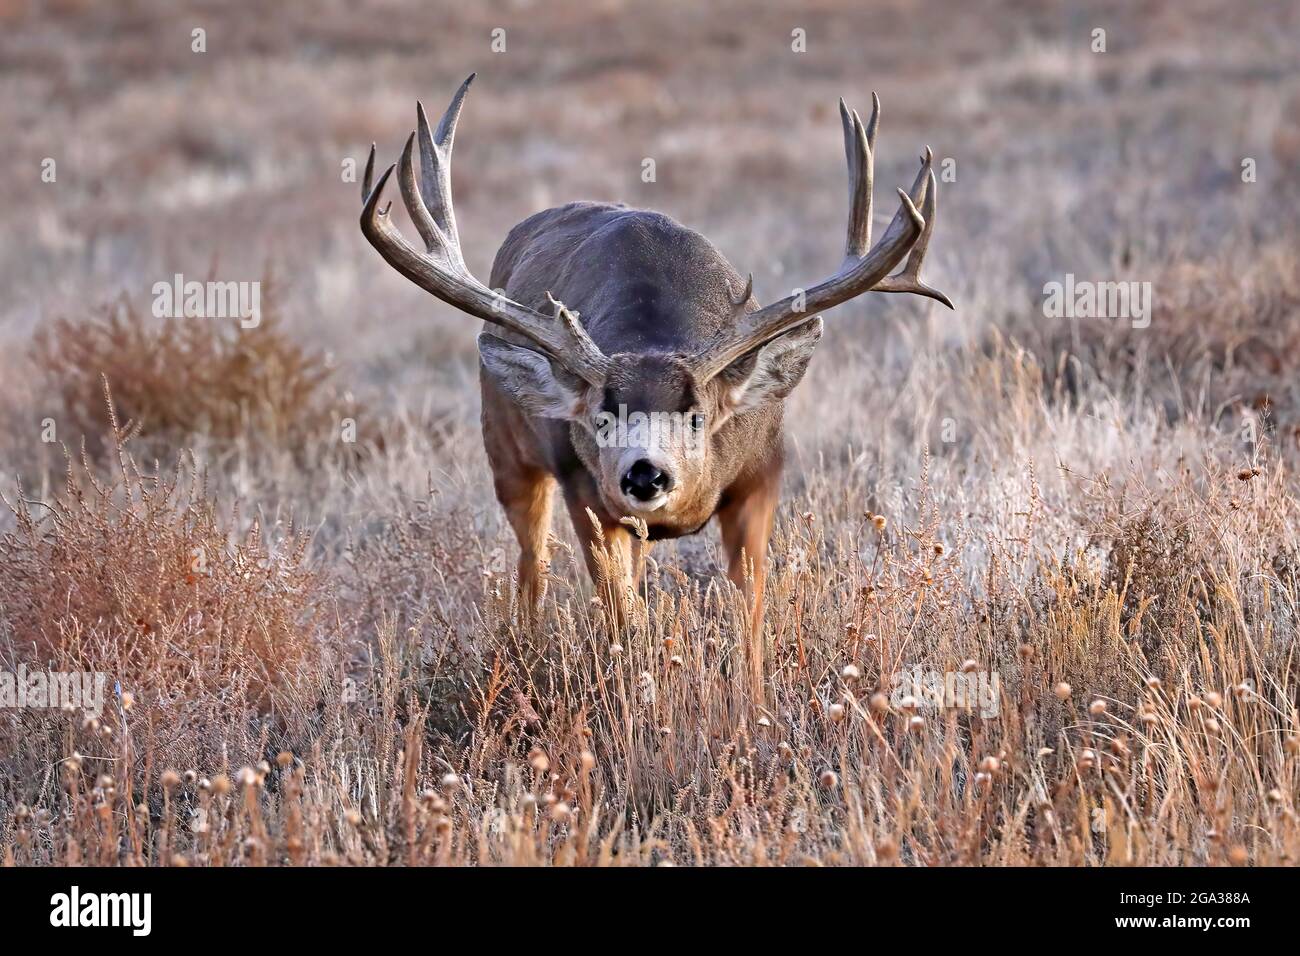 Mule deer buck (Odocoileus hemionus) with large antlers standing in a field of brush staring at the camera; Colorado, United States of America Stock Photo